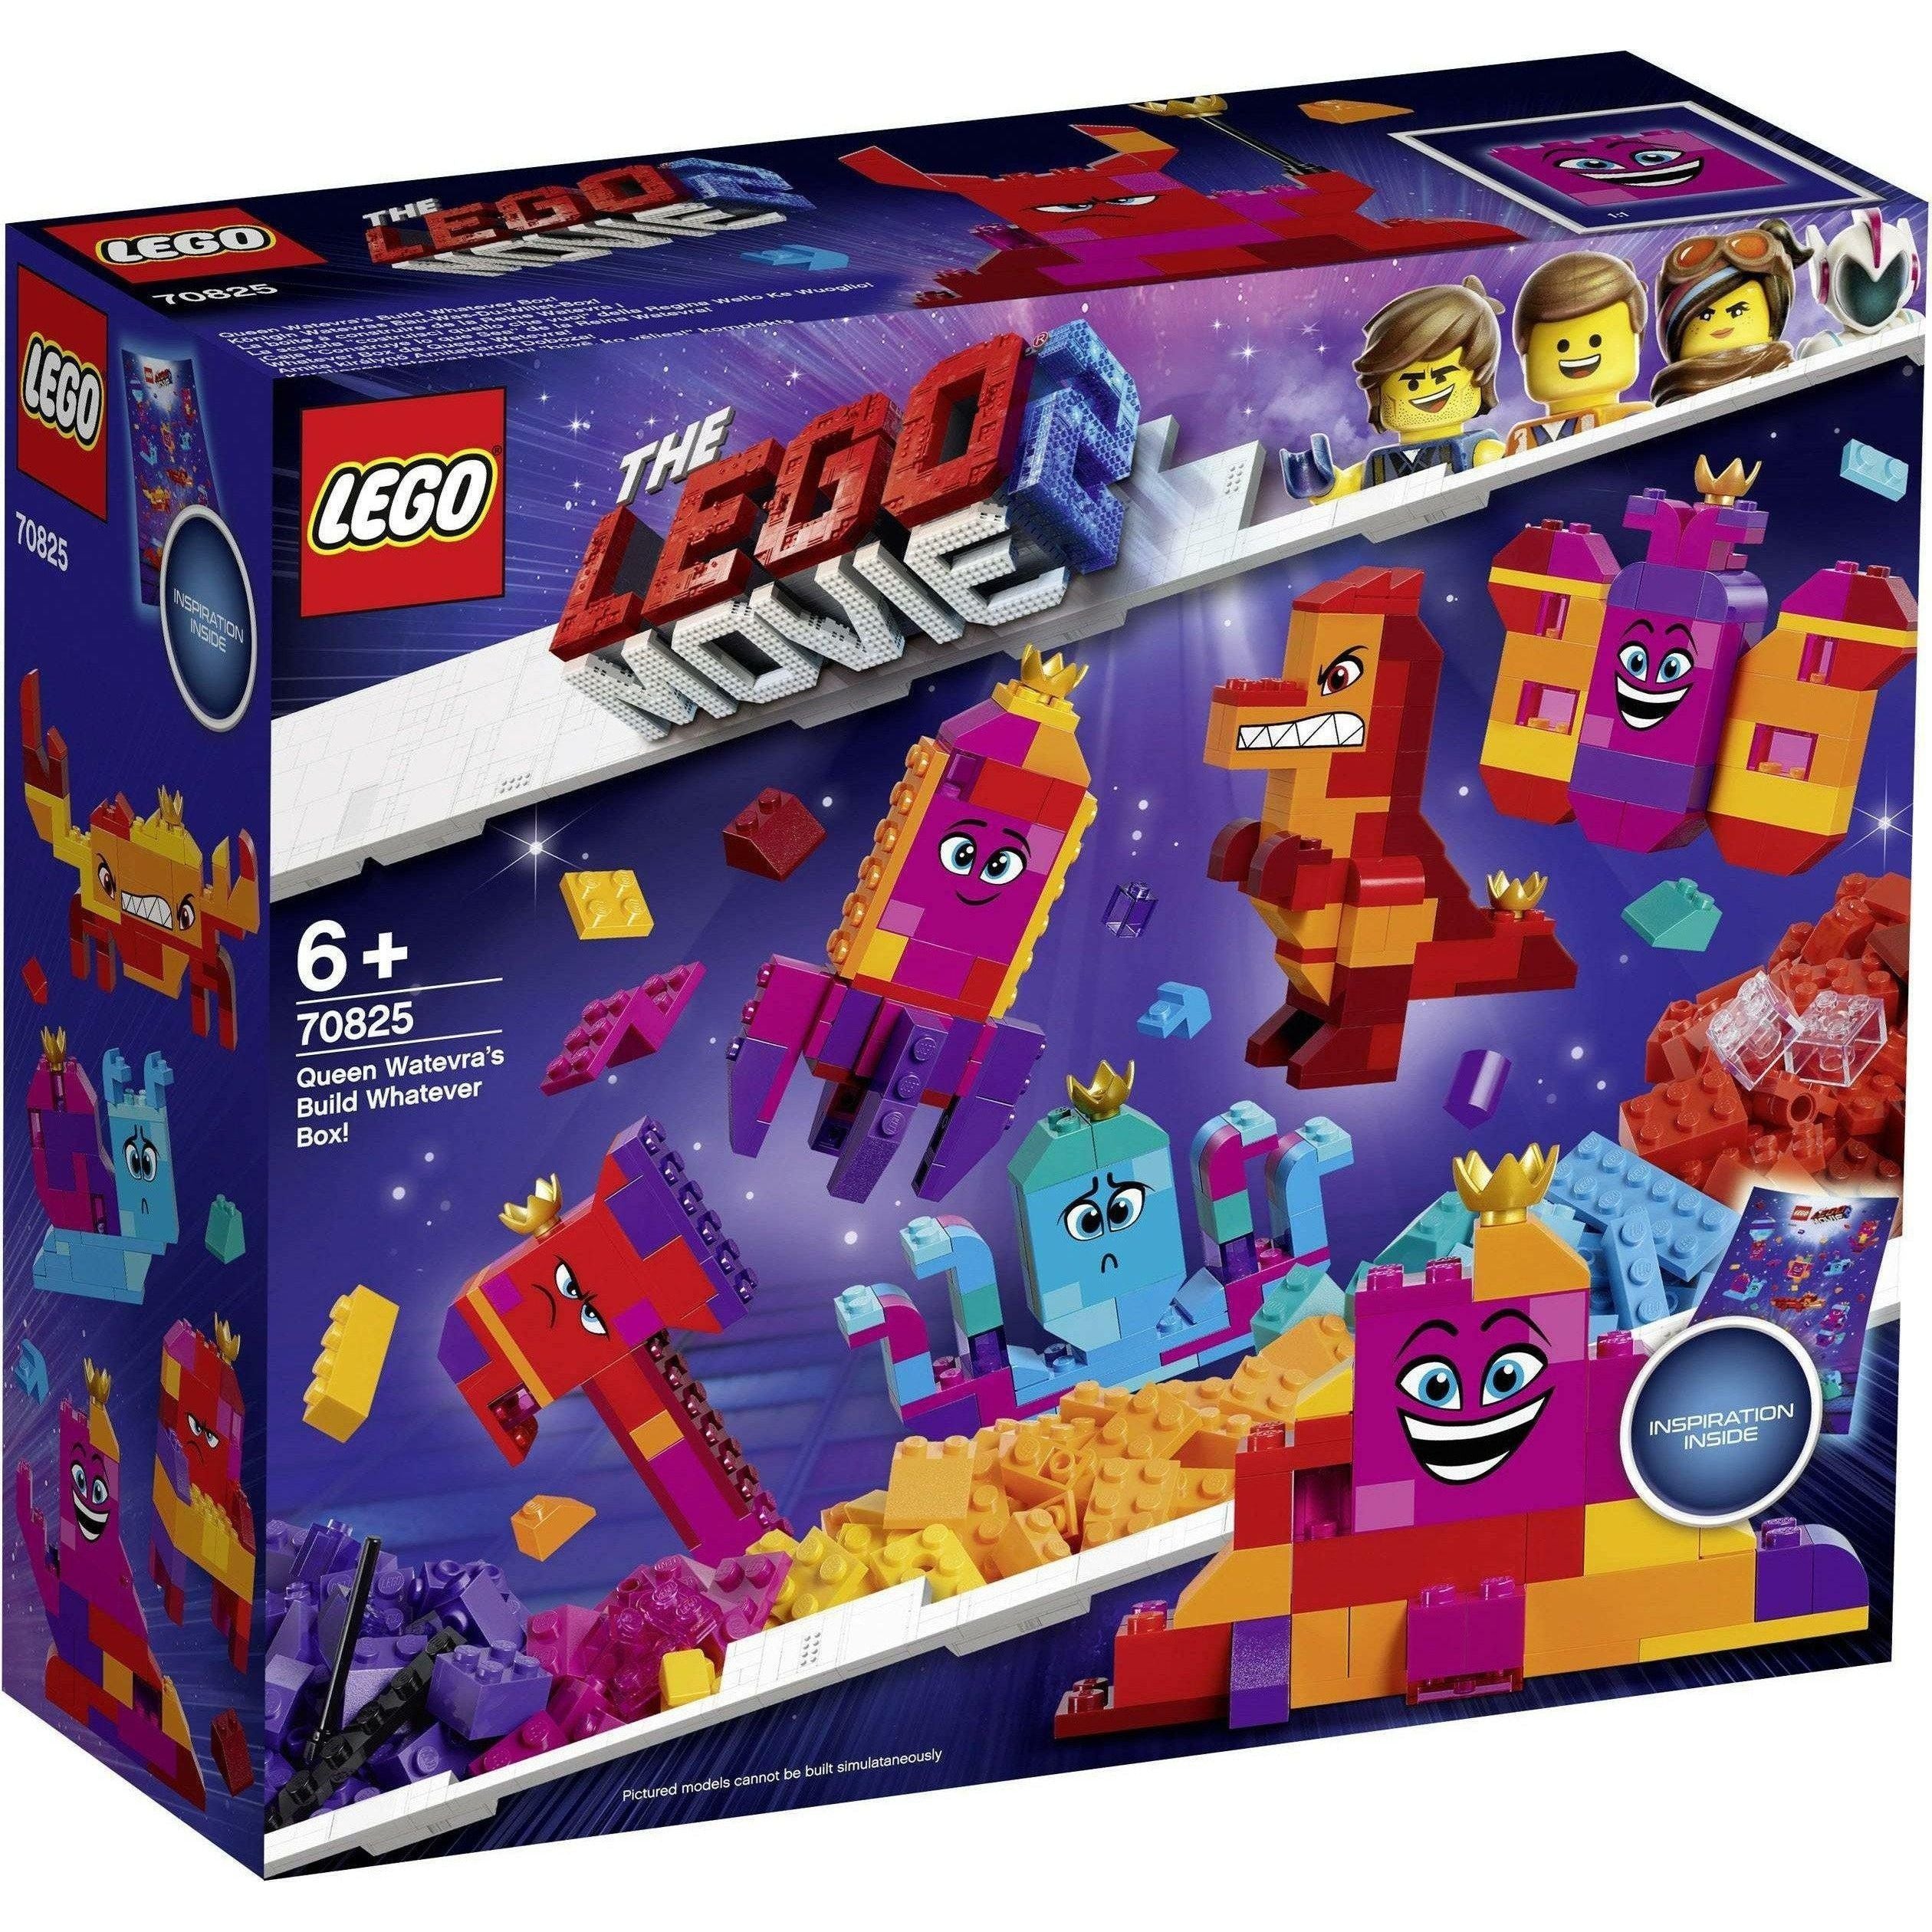 LEGO 70825 The LEGO Movie Queen Watevras Build Whatever Box - BumbleToys - 8-13 Years, Arabic Triangle Trading, Boys, LEGO, LEGO Movie, OXE